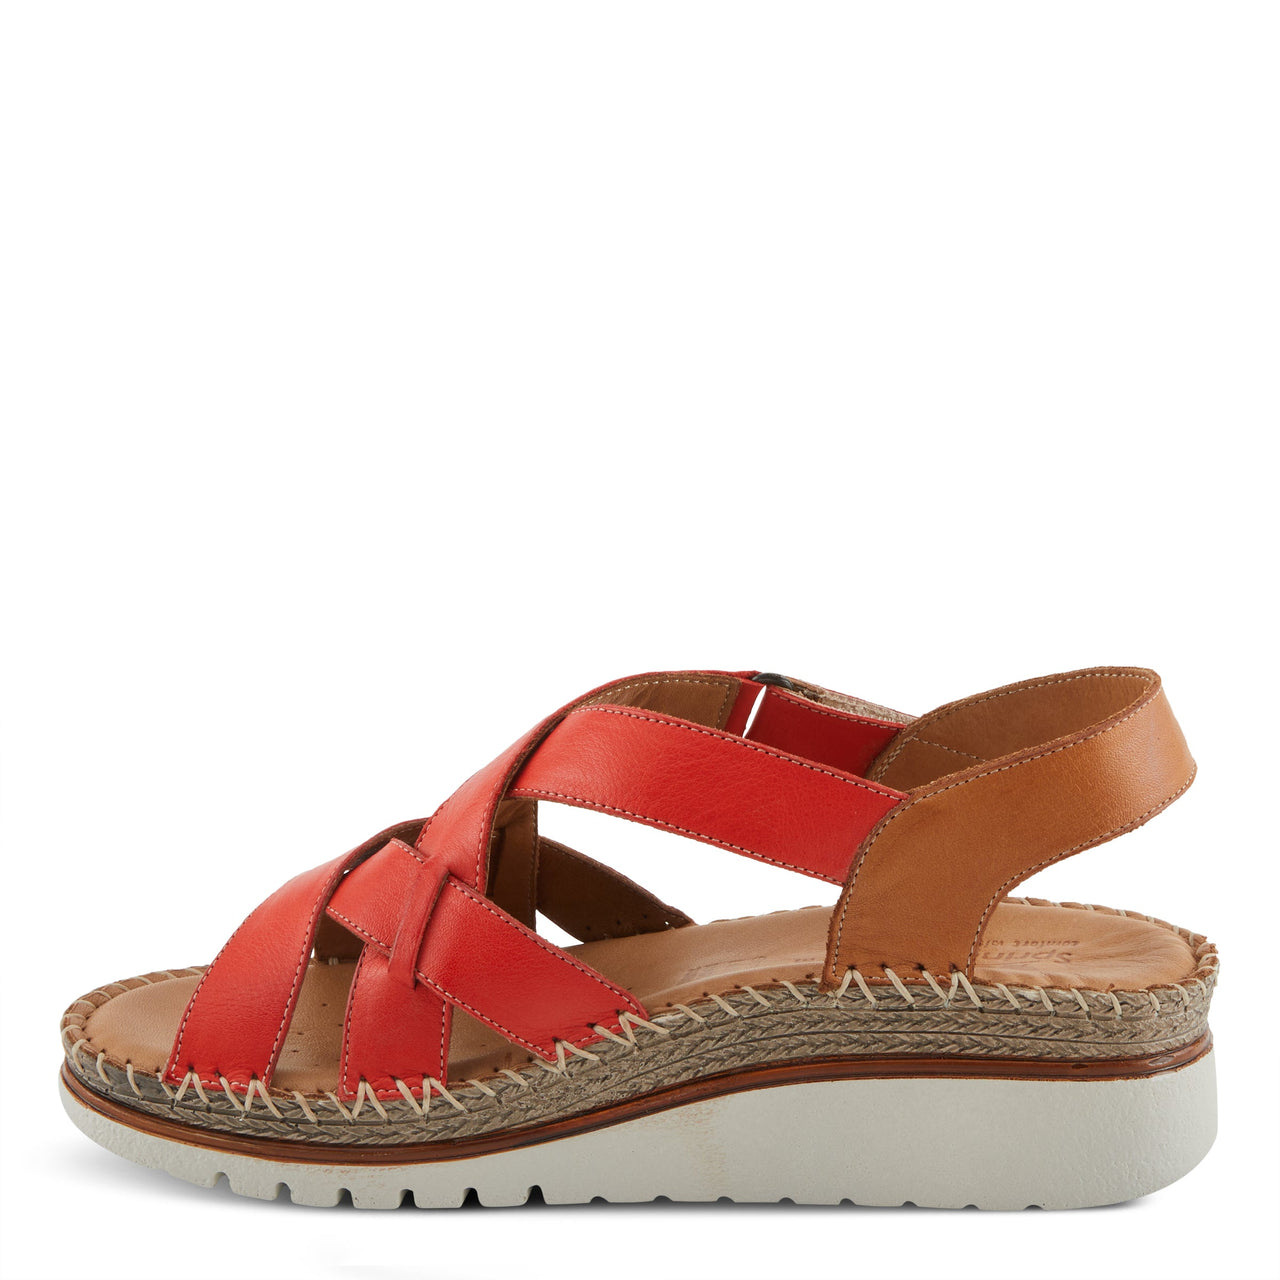 Spring Step Migula Sandals in red with arch support and shock-absorbing heel